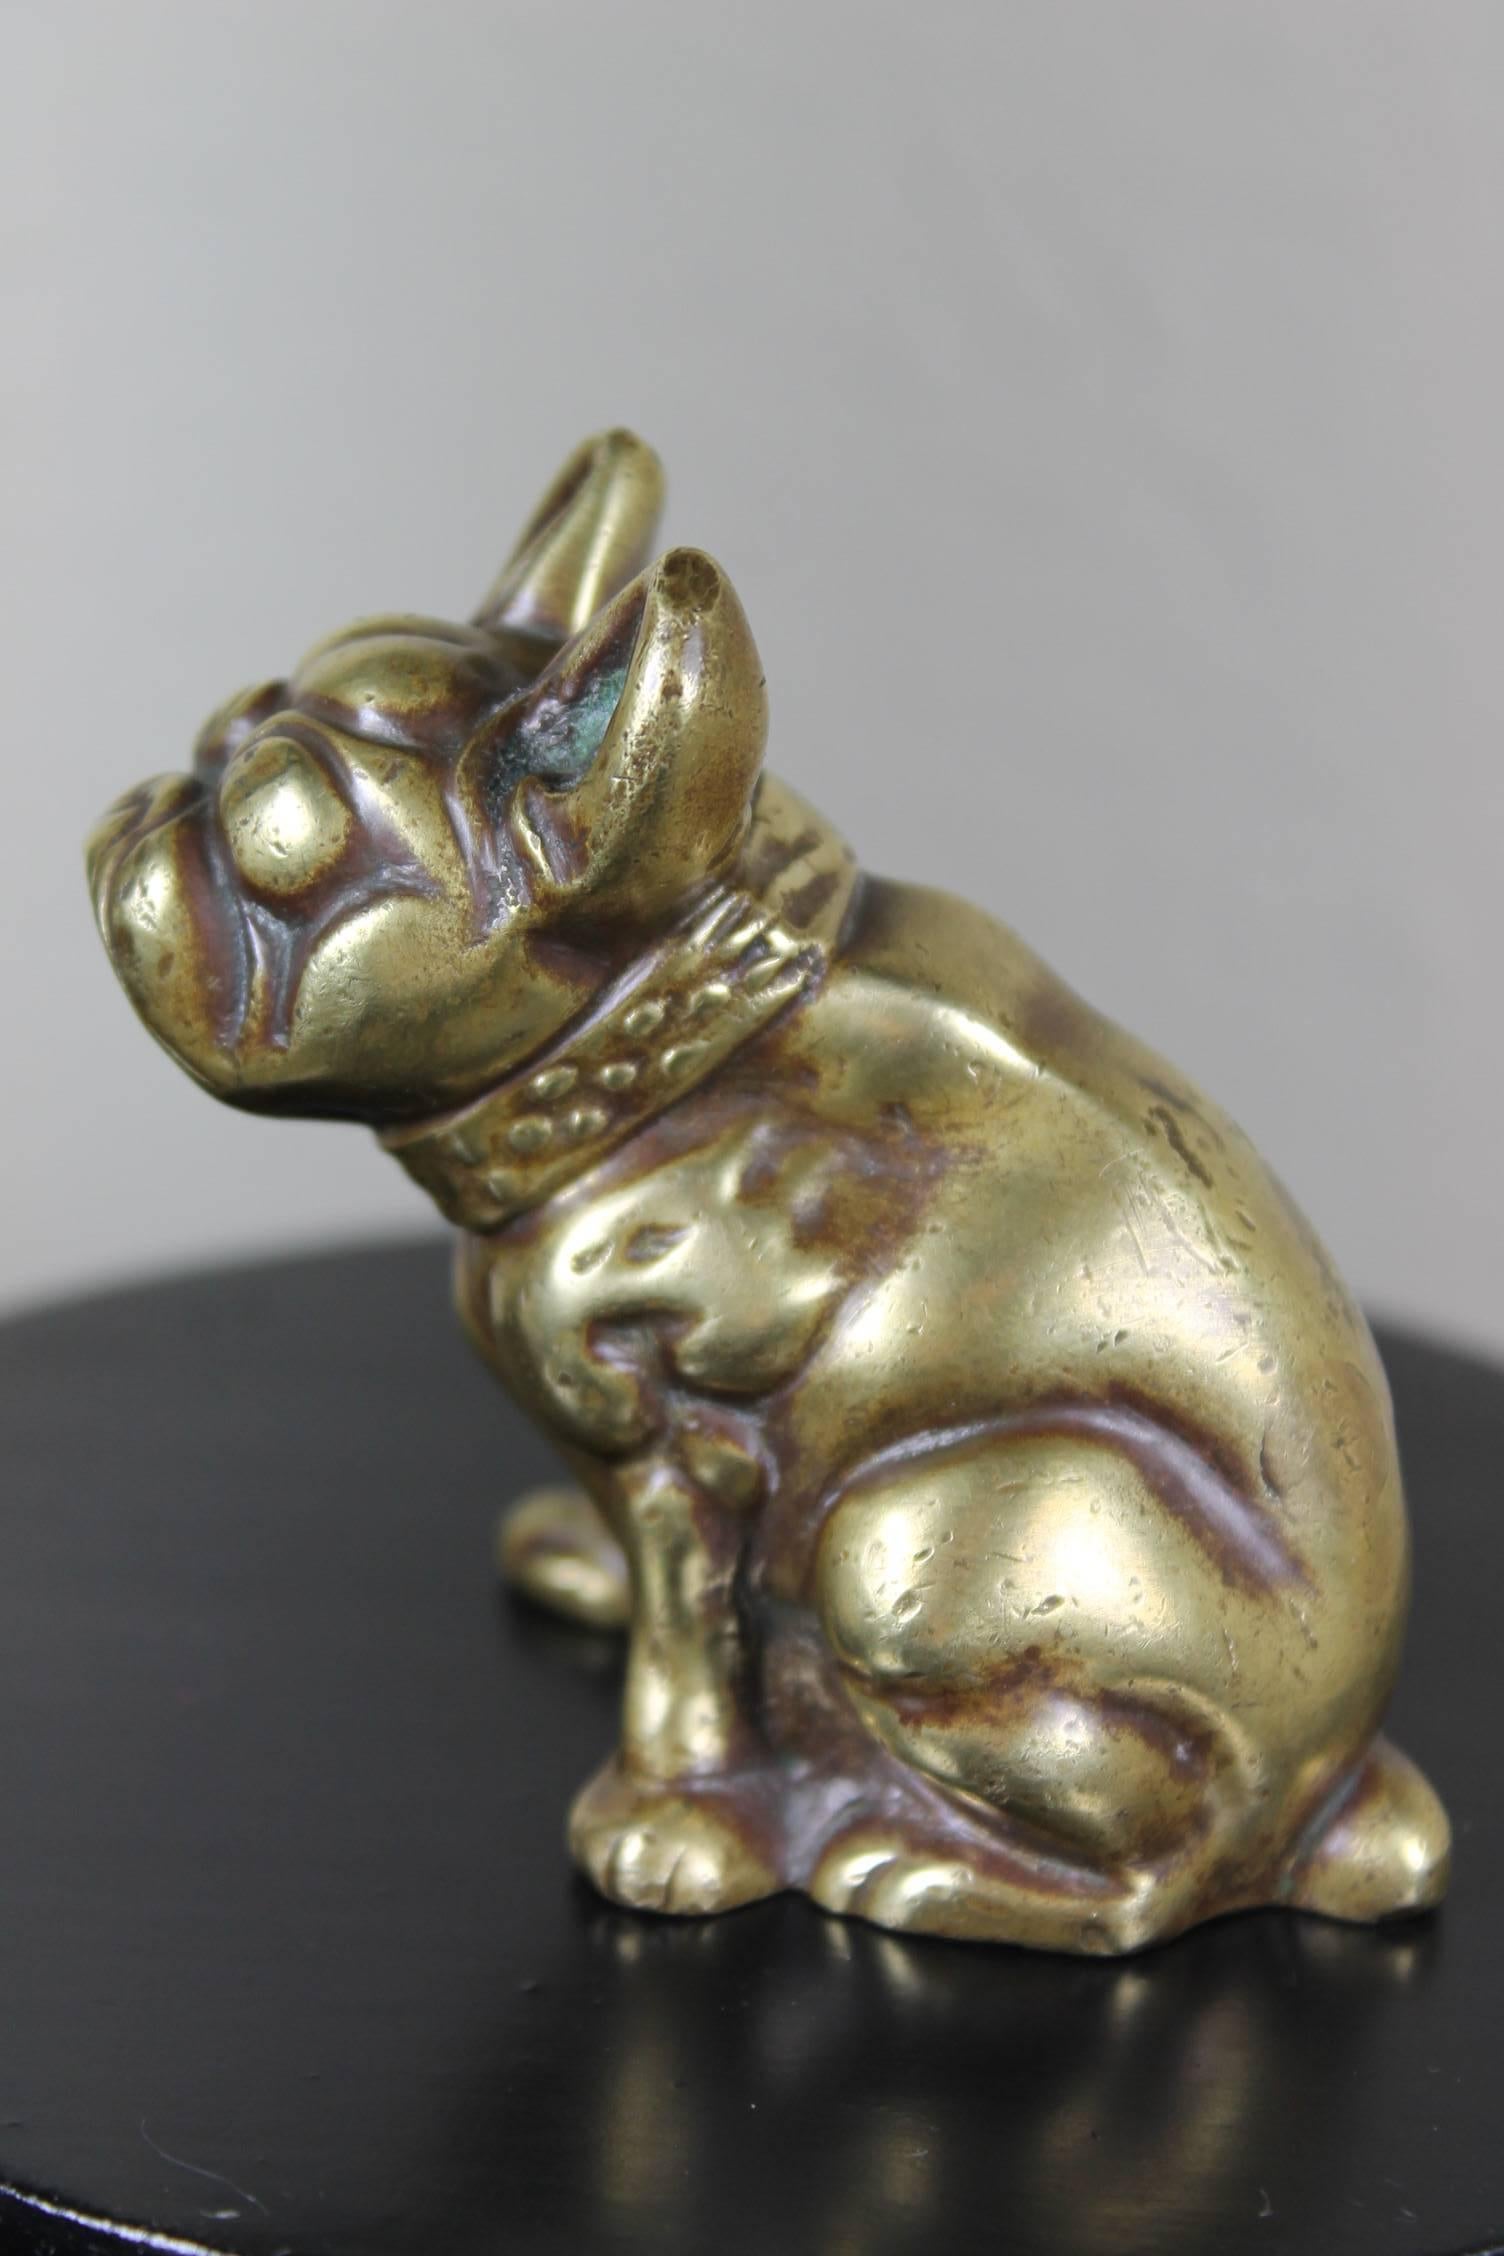 Lovely Art Deco heavy Copper Sculpture - Caricature of sitting French Bulldog.
Bully - Bullie - Frenchie Dog.  
Charming Antique Collectible Piece from the early 20th Century.
Comes from an Ashtray. 
This beautiful Dog Figure can be used as a